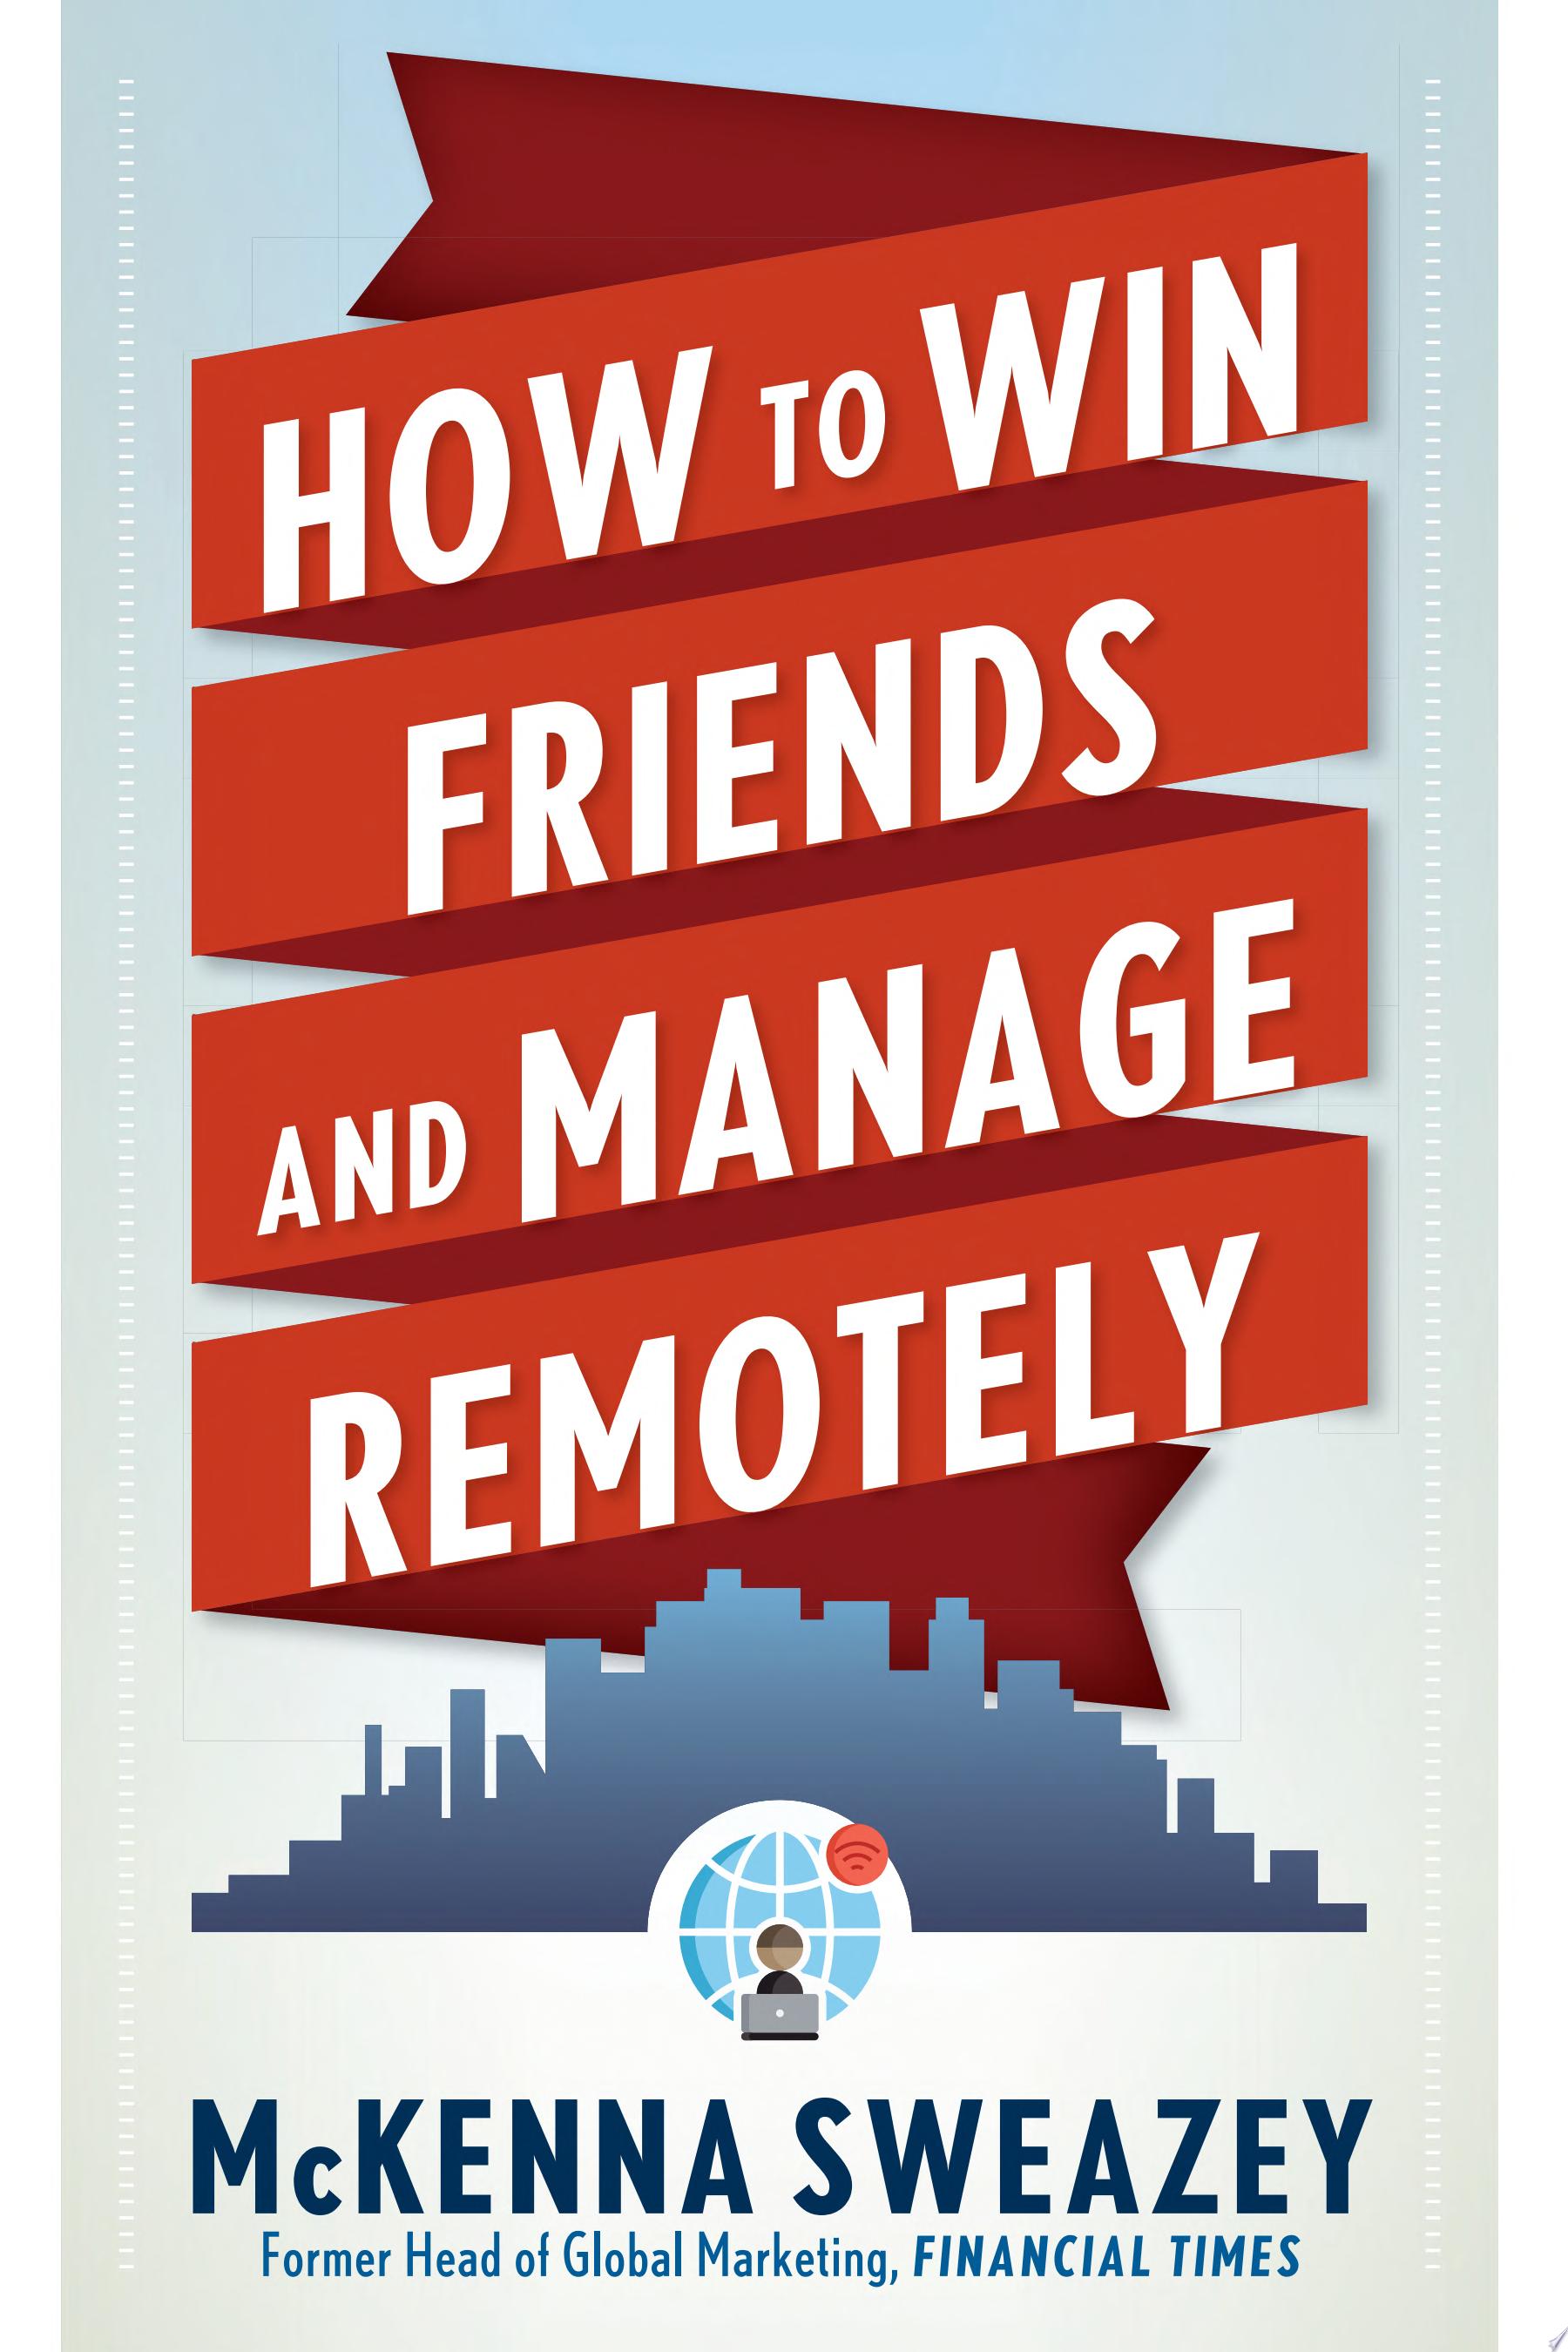 Image for "How to Win Friends and Manage Remotely"